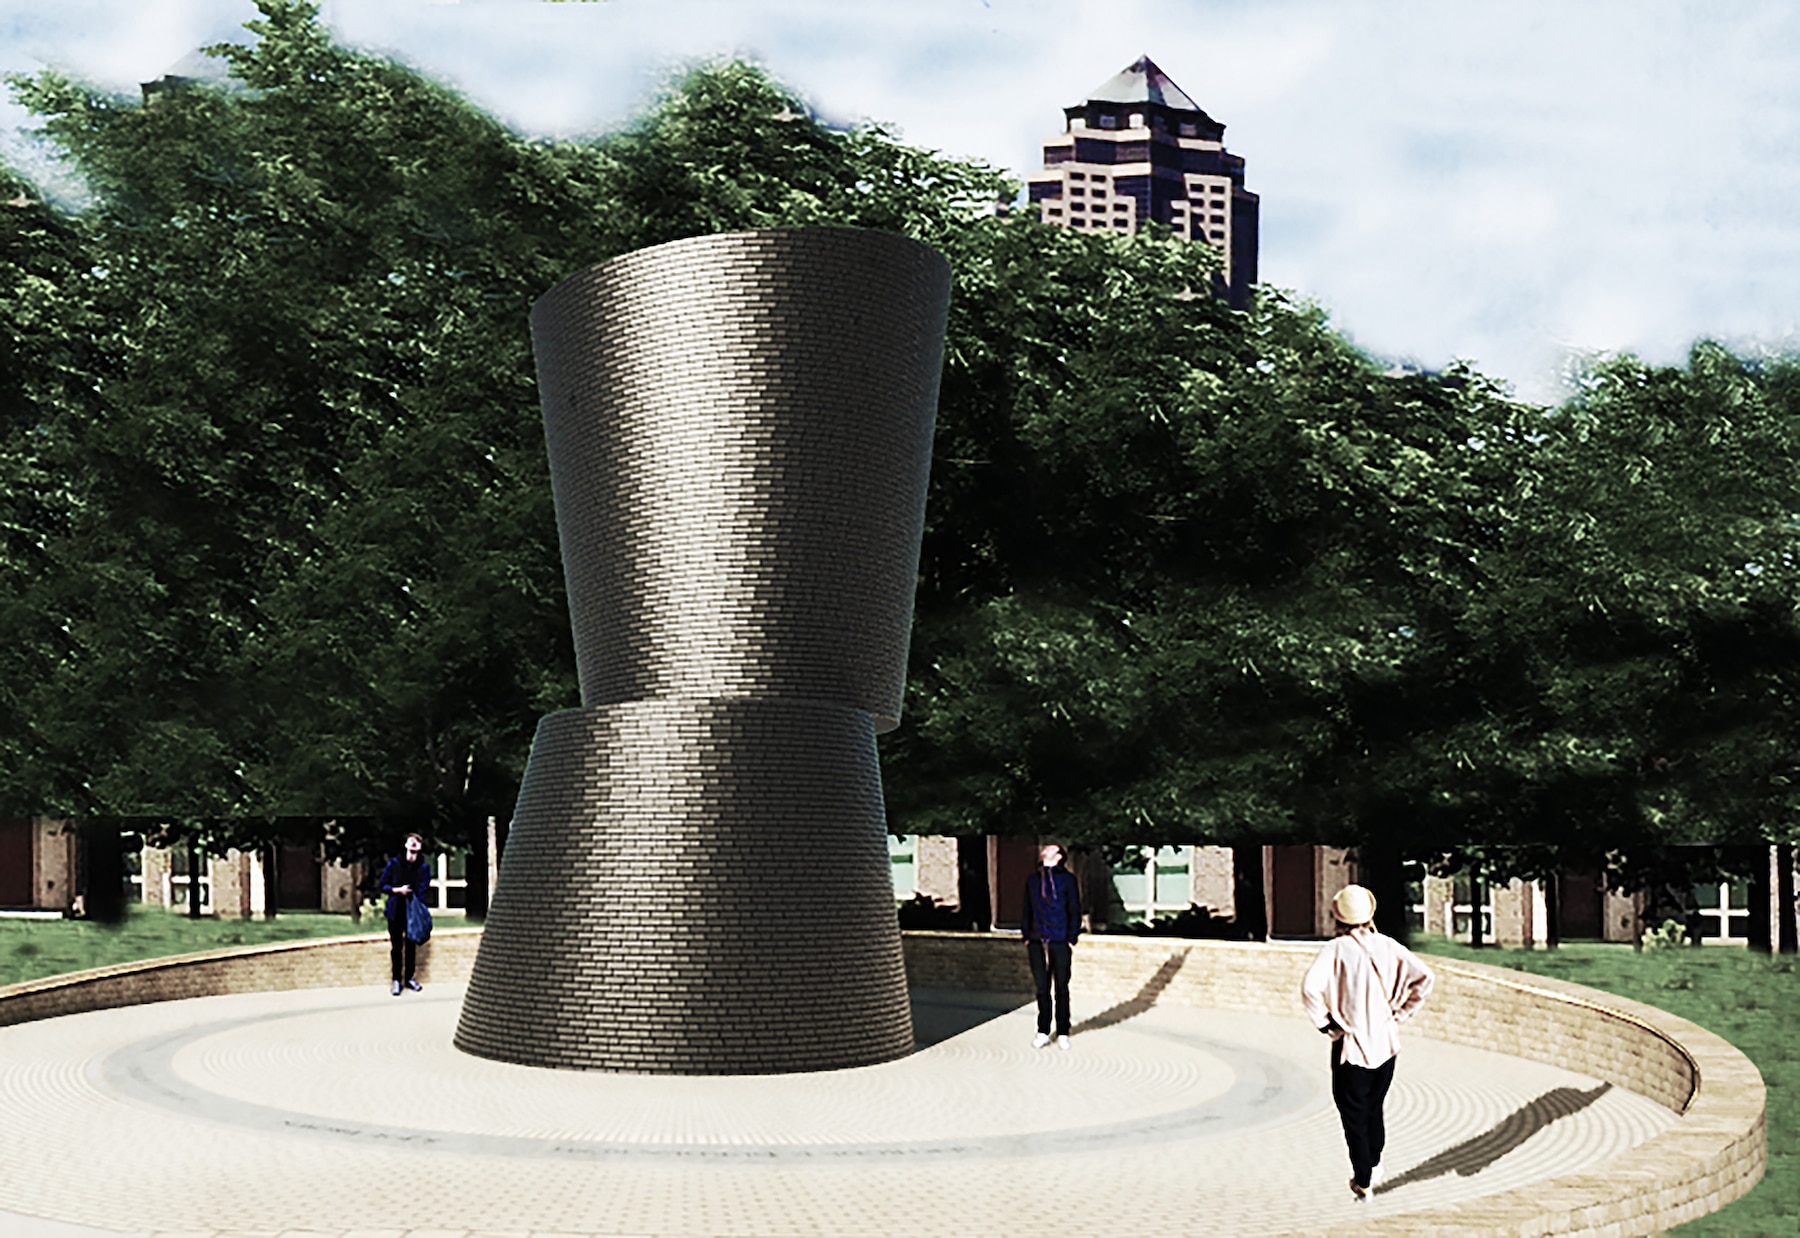 Rendering of Kerry James Marshall's "A Monumental Journey" by Substance Architecture.